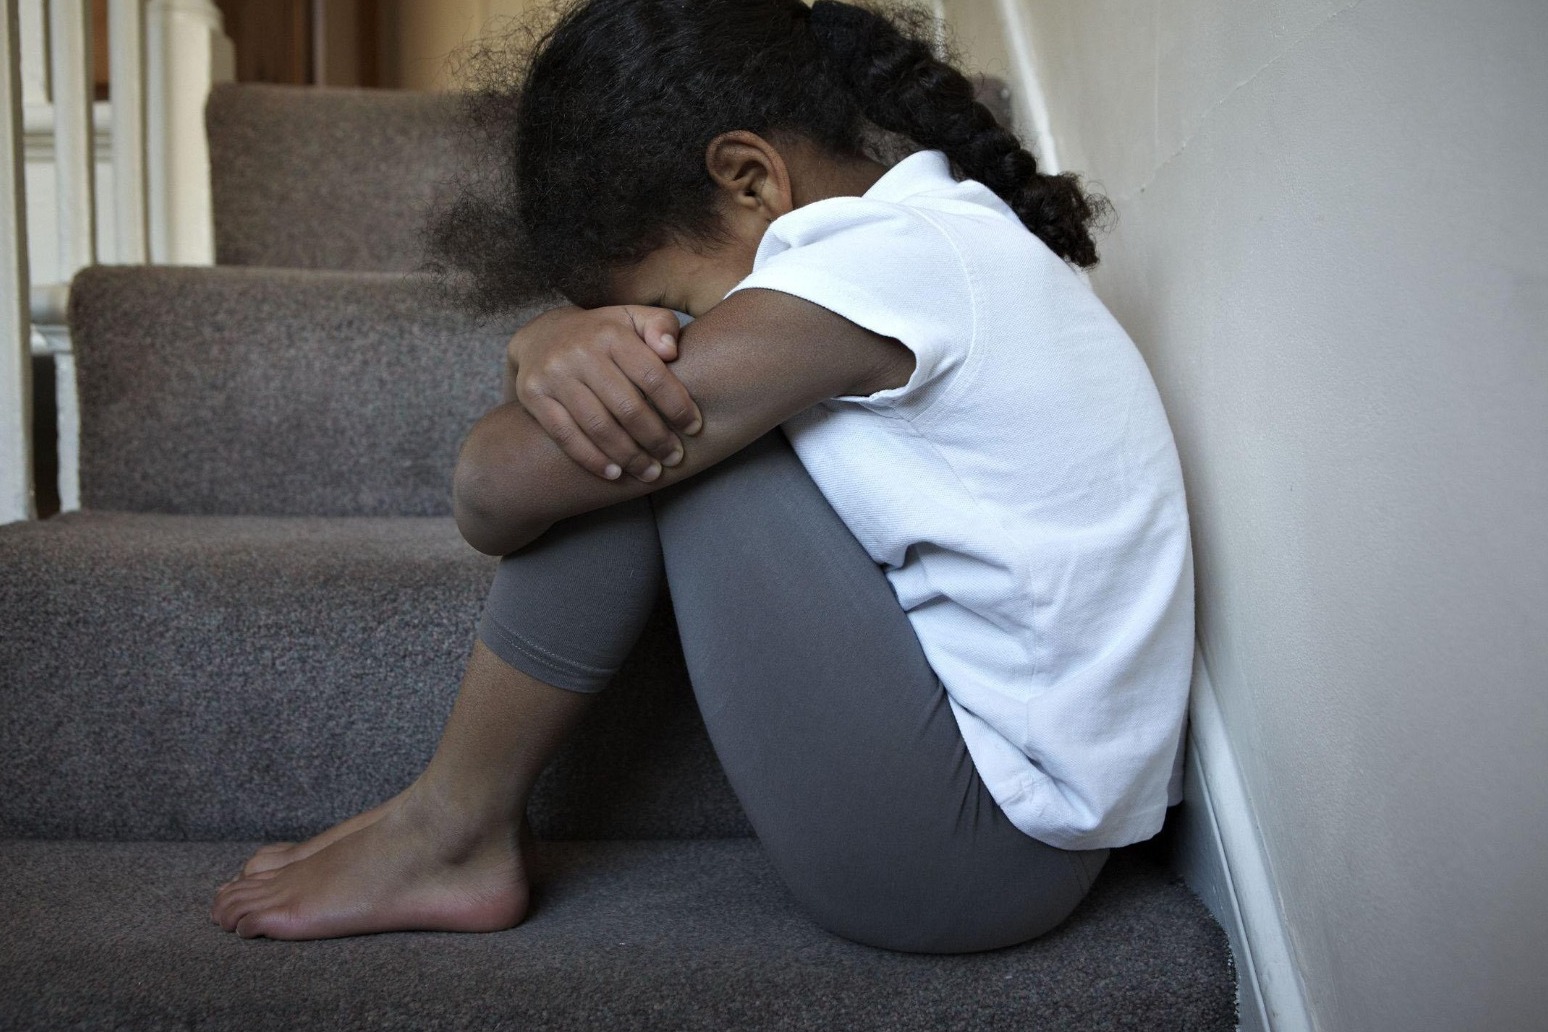 Children’s commissioner calls for England to consider ban on smacking 